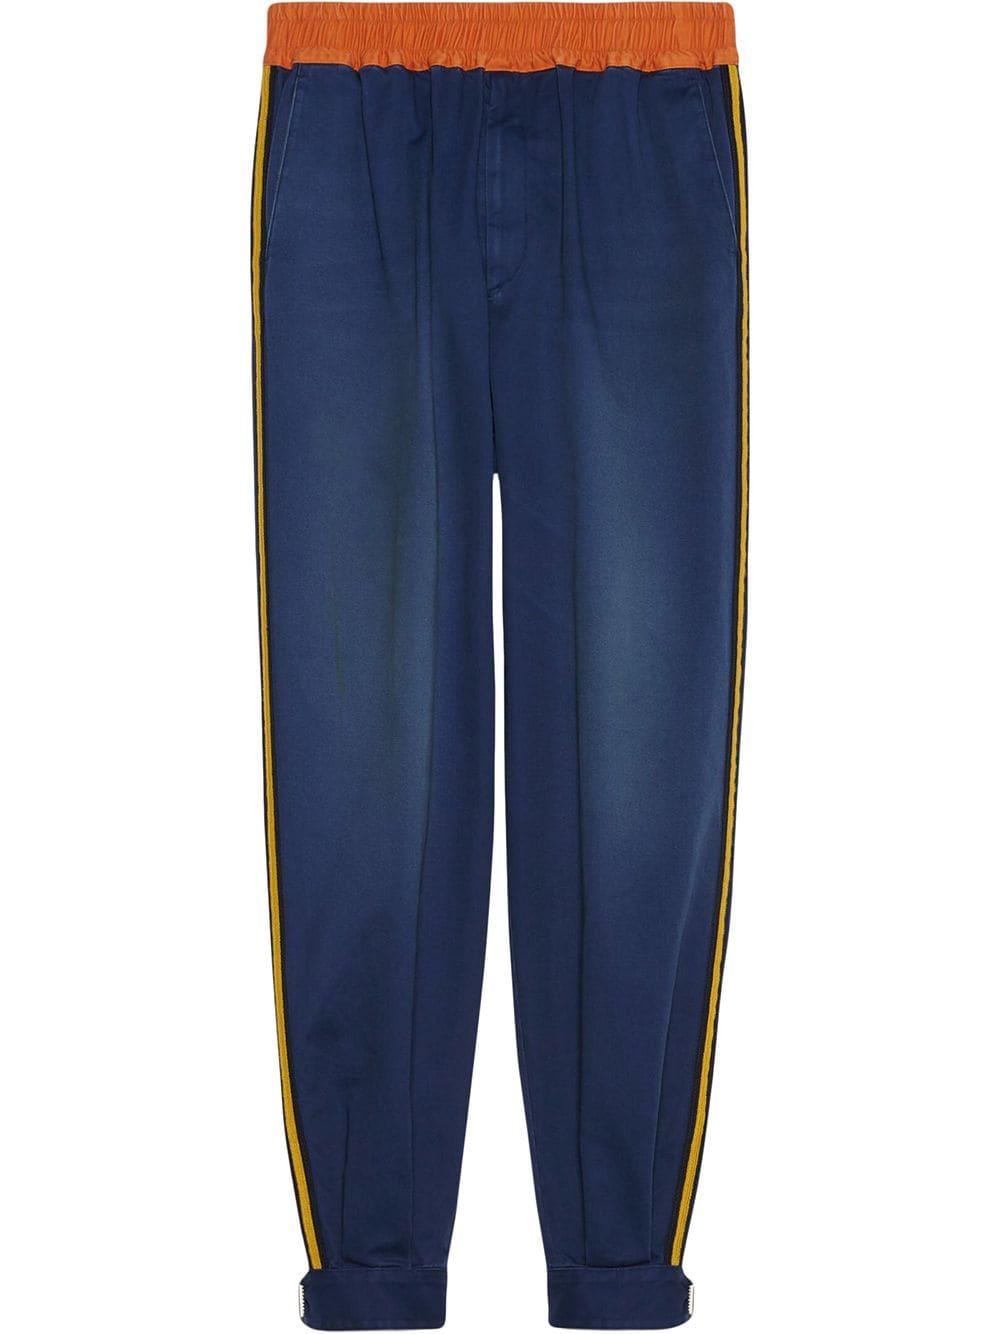 Gucci Cotton Side-stripe Track Pants in Blue for Men - Lyst